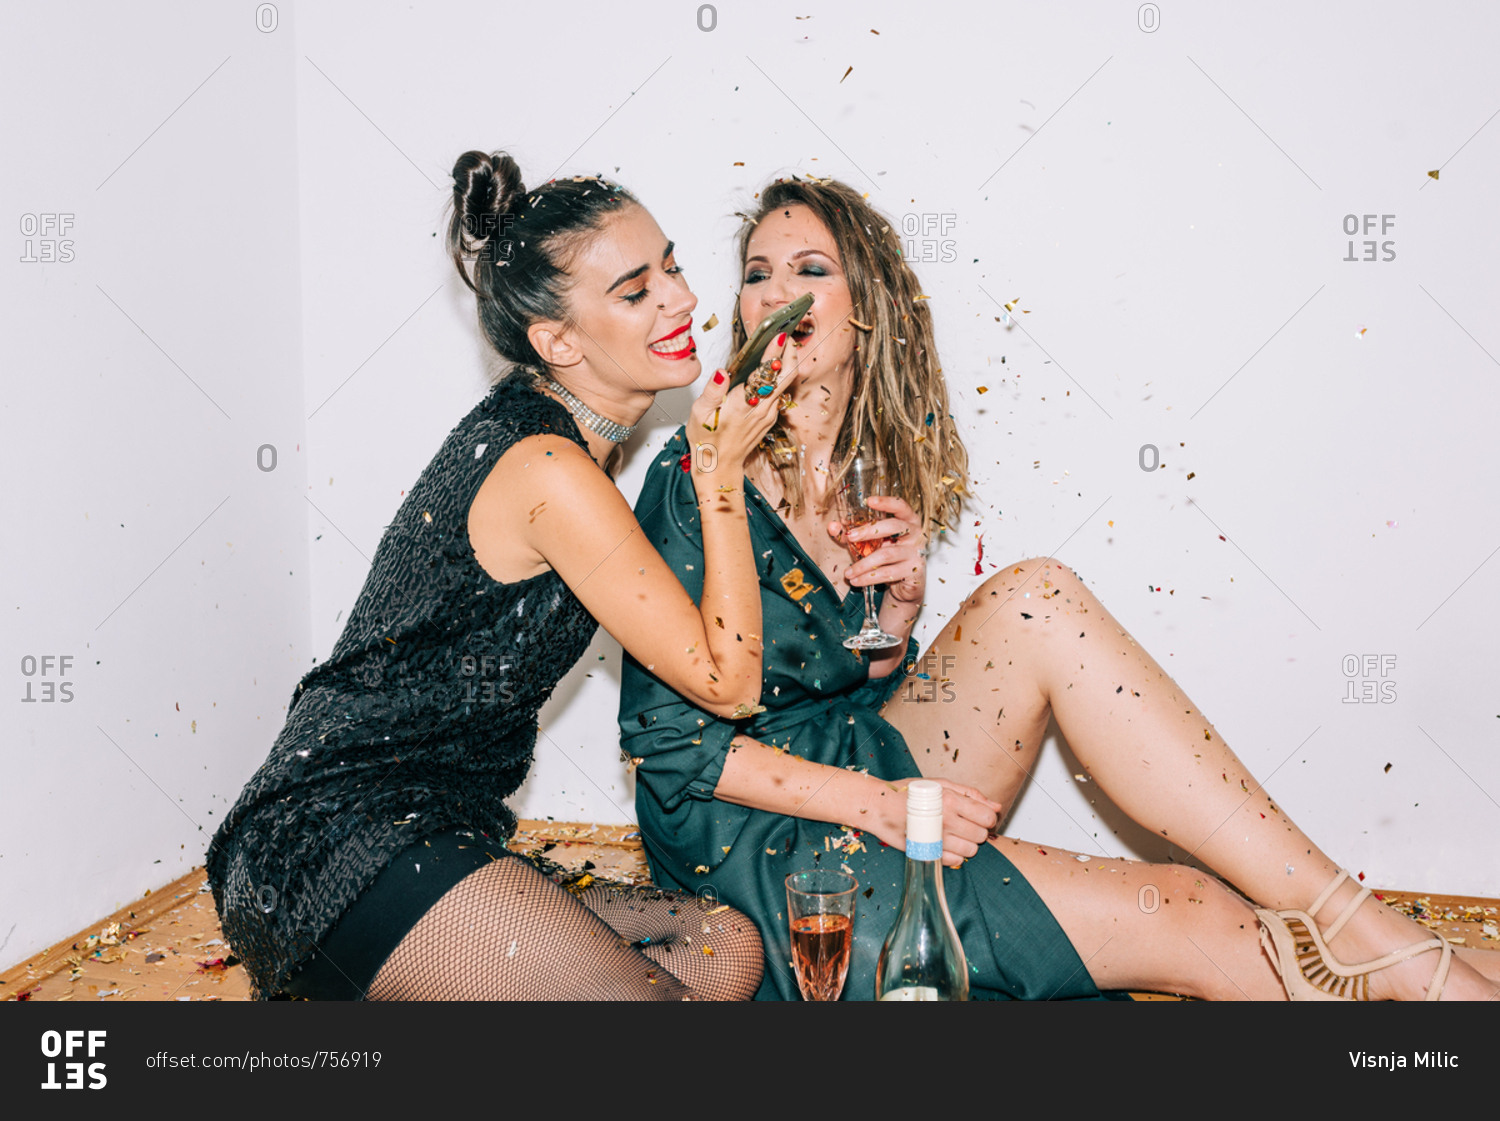 Two dressed up women celebrating New Year's Eve and wishing a happy New Year to someone on the phone